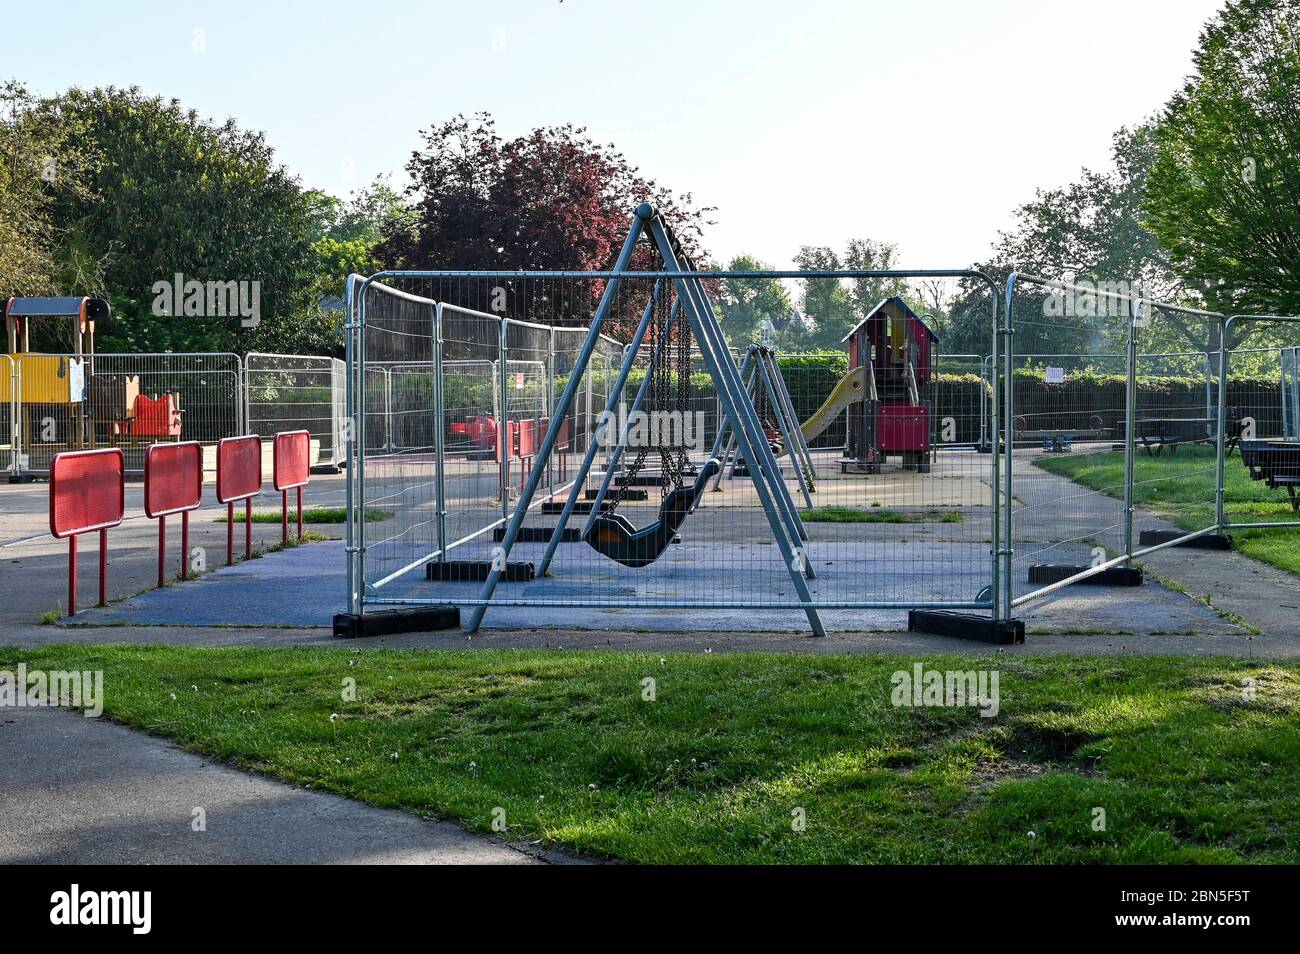 Childrens swings in a playground or play park surrounded by barriers during the coronavirus pandemic. Stock Photo